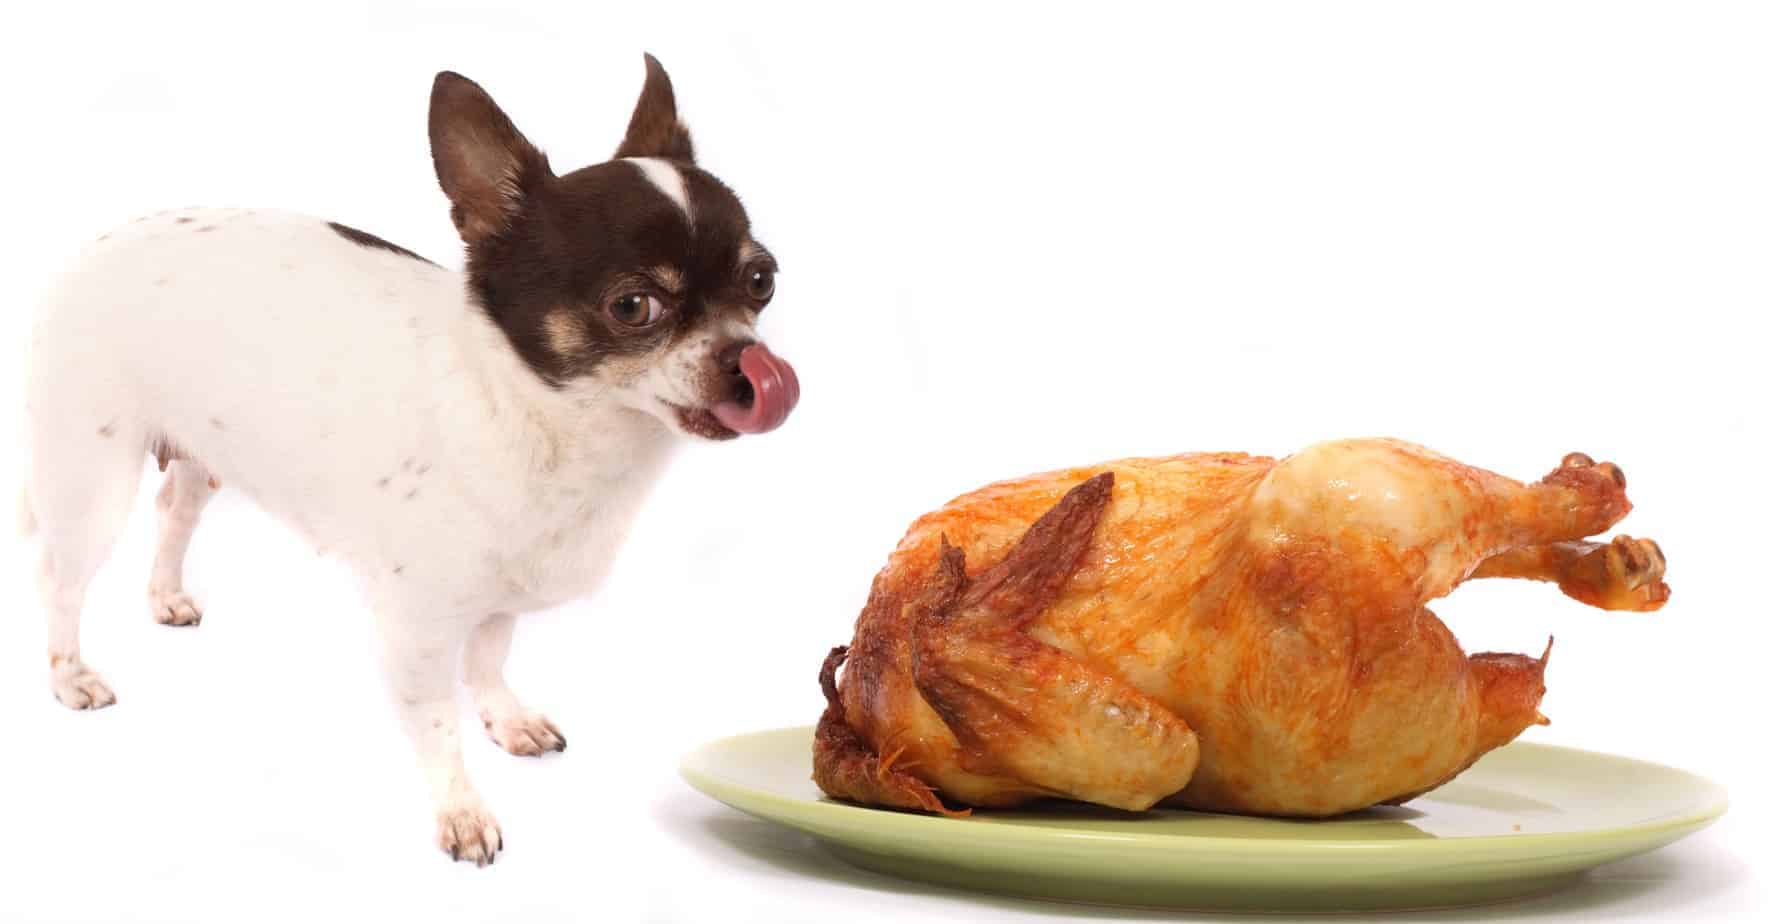 Turn holiday leftovers into pet food instead of allowing your pup a few table scraps here and there. Understand which foods are safe.